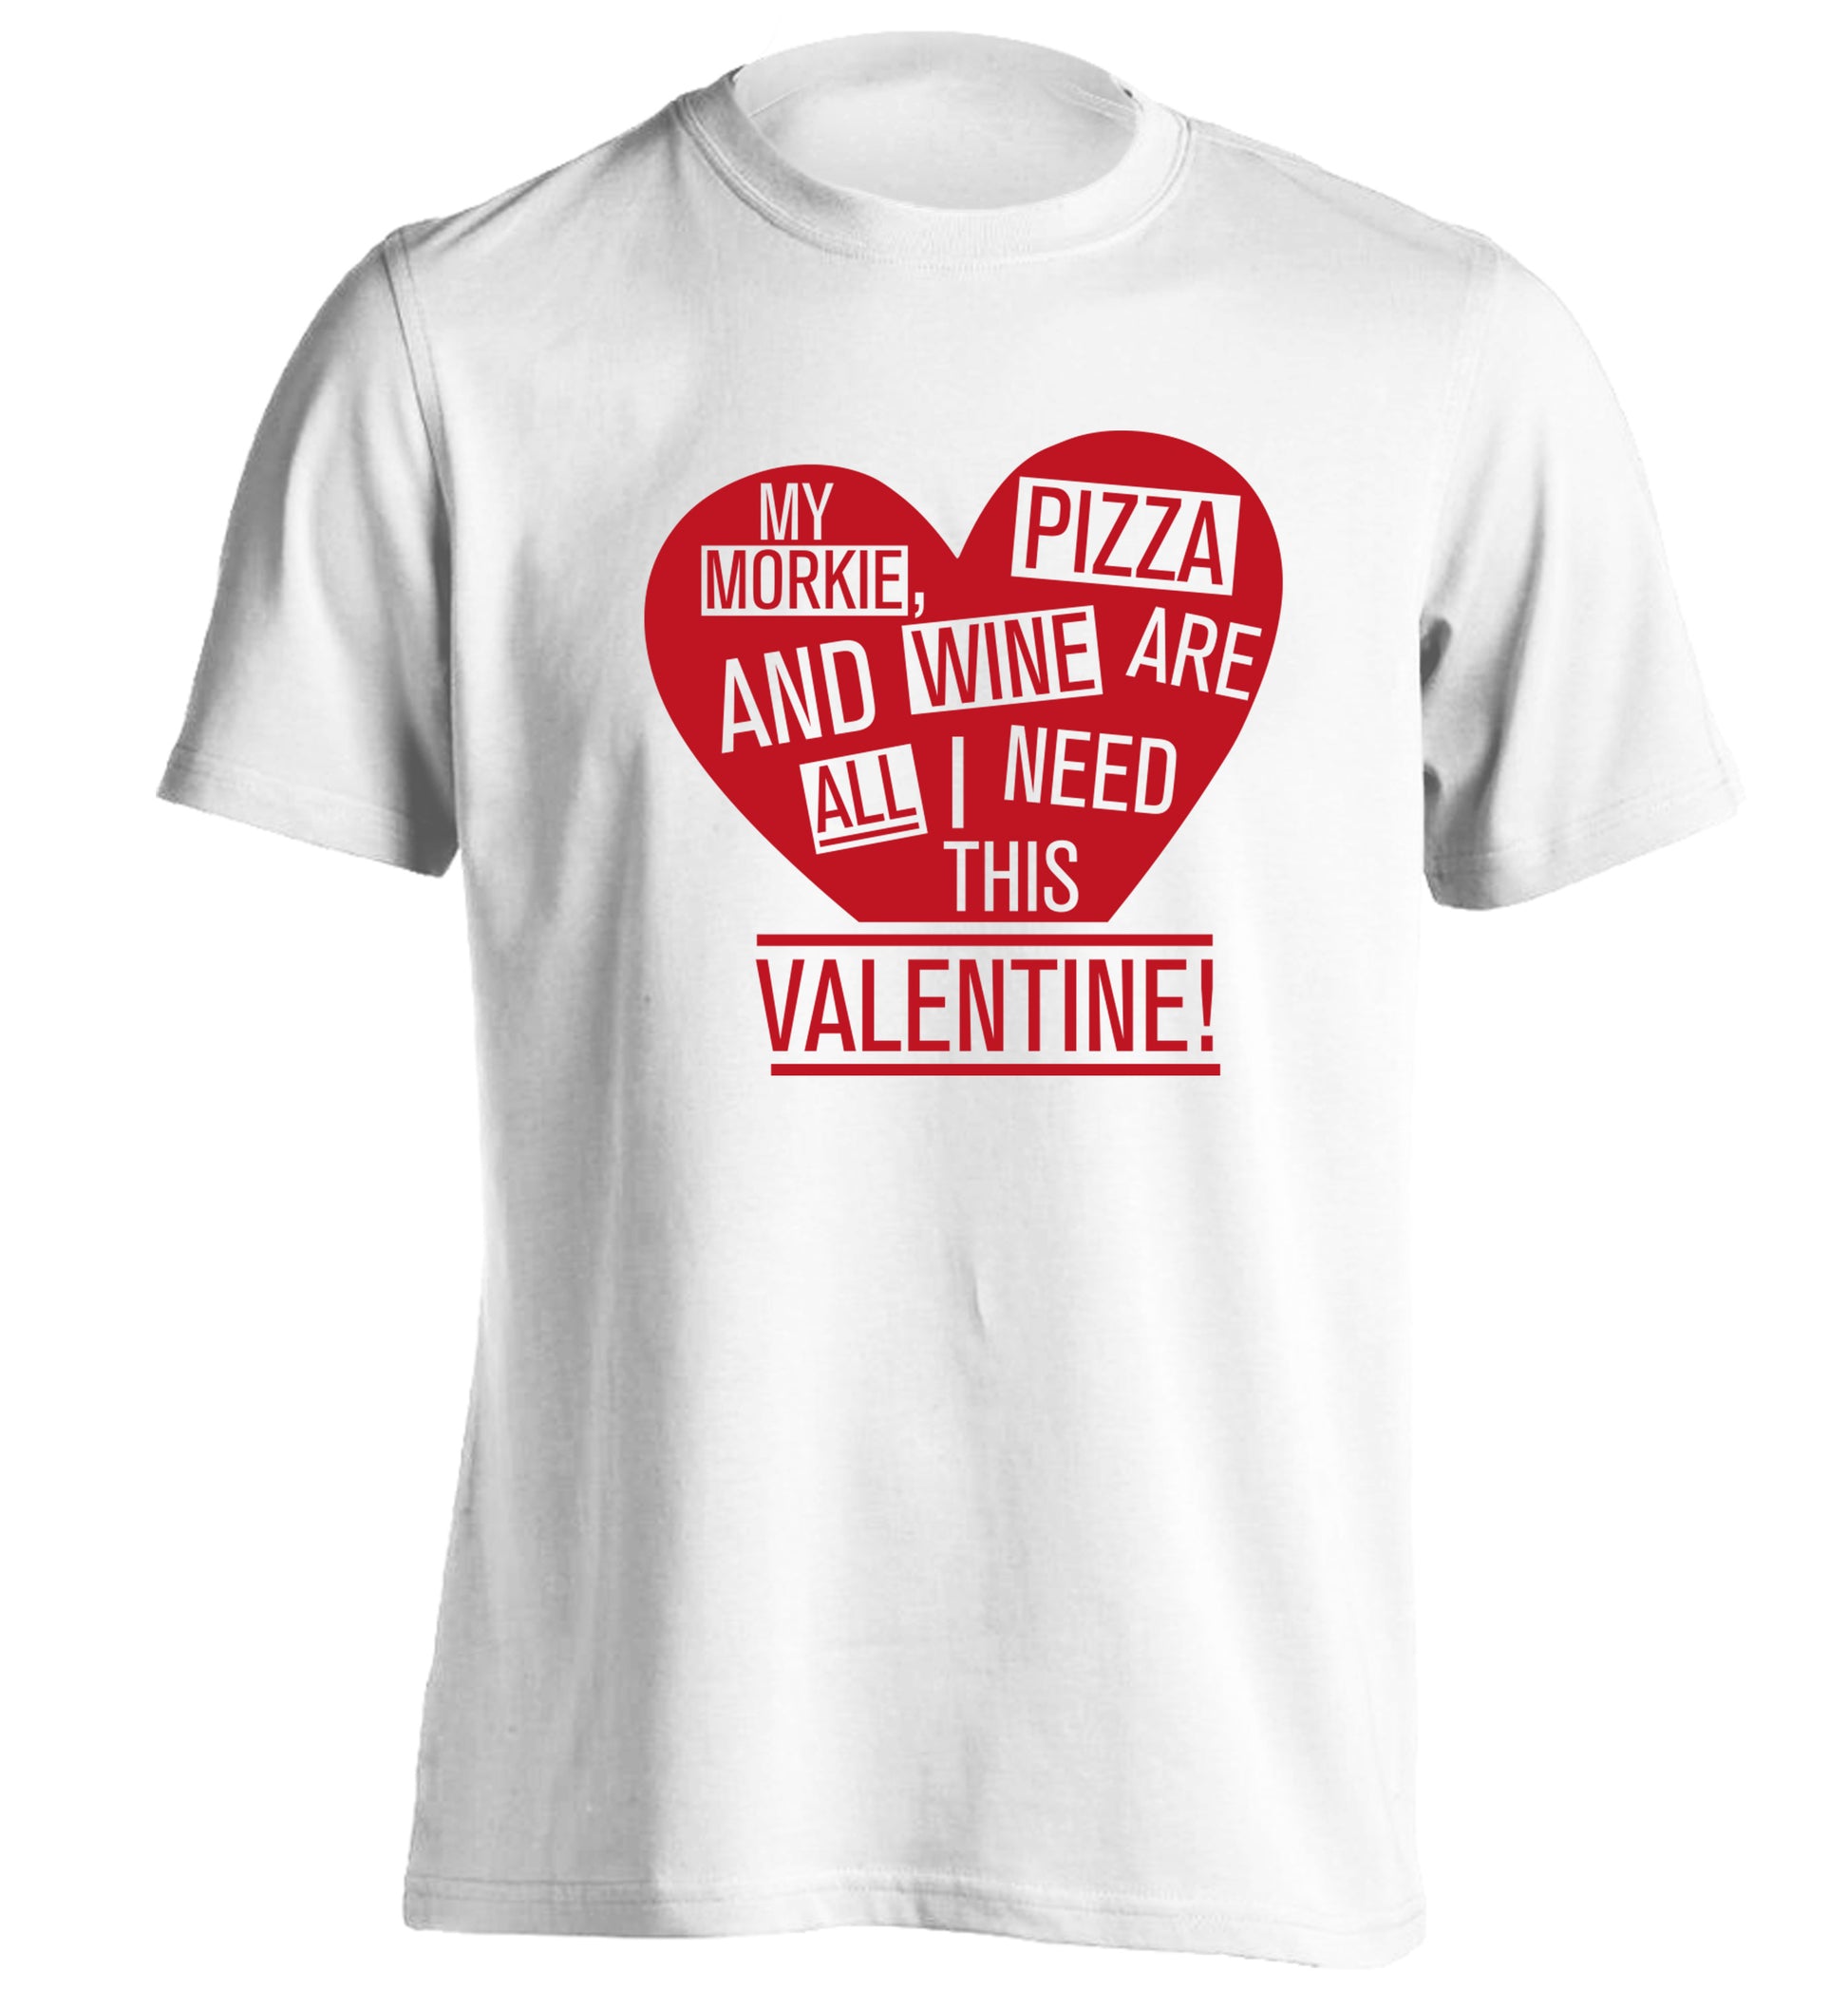 My morkie, pizza and wine are all I need this valentine! adults unisex white Tshirt 2XL